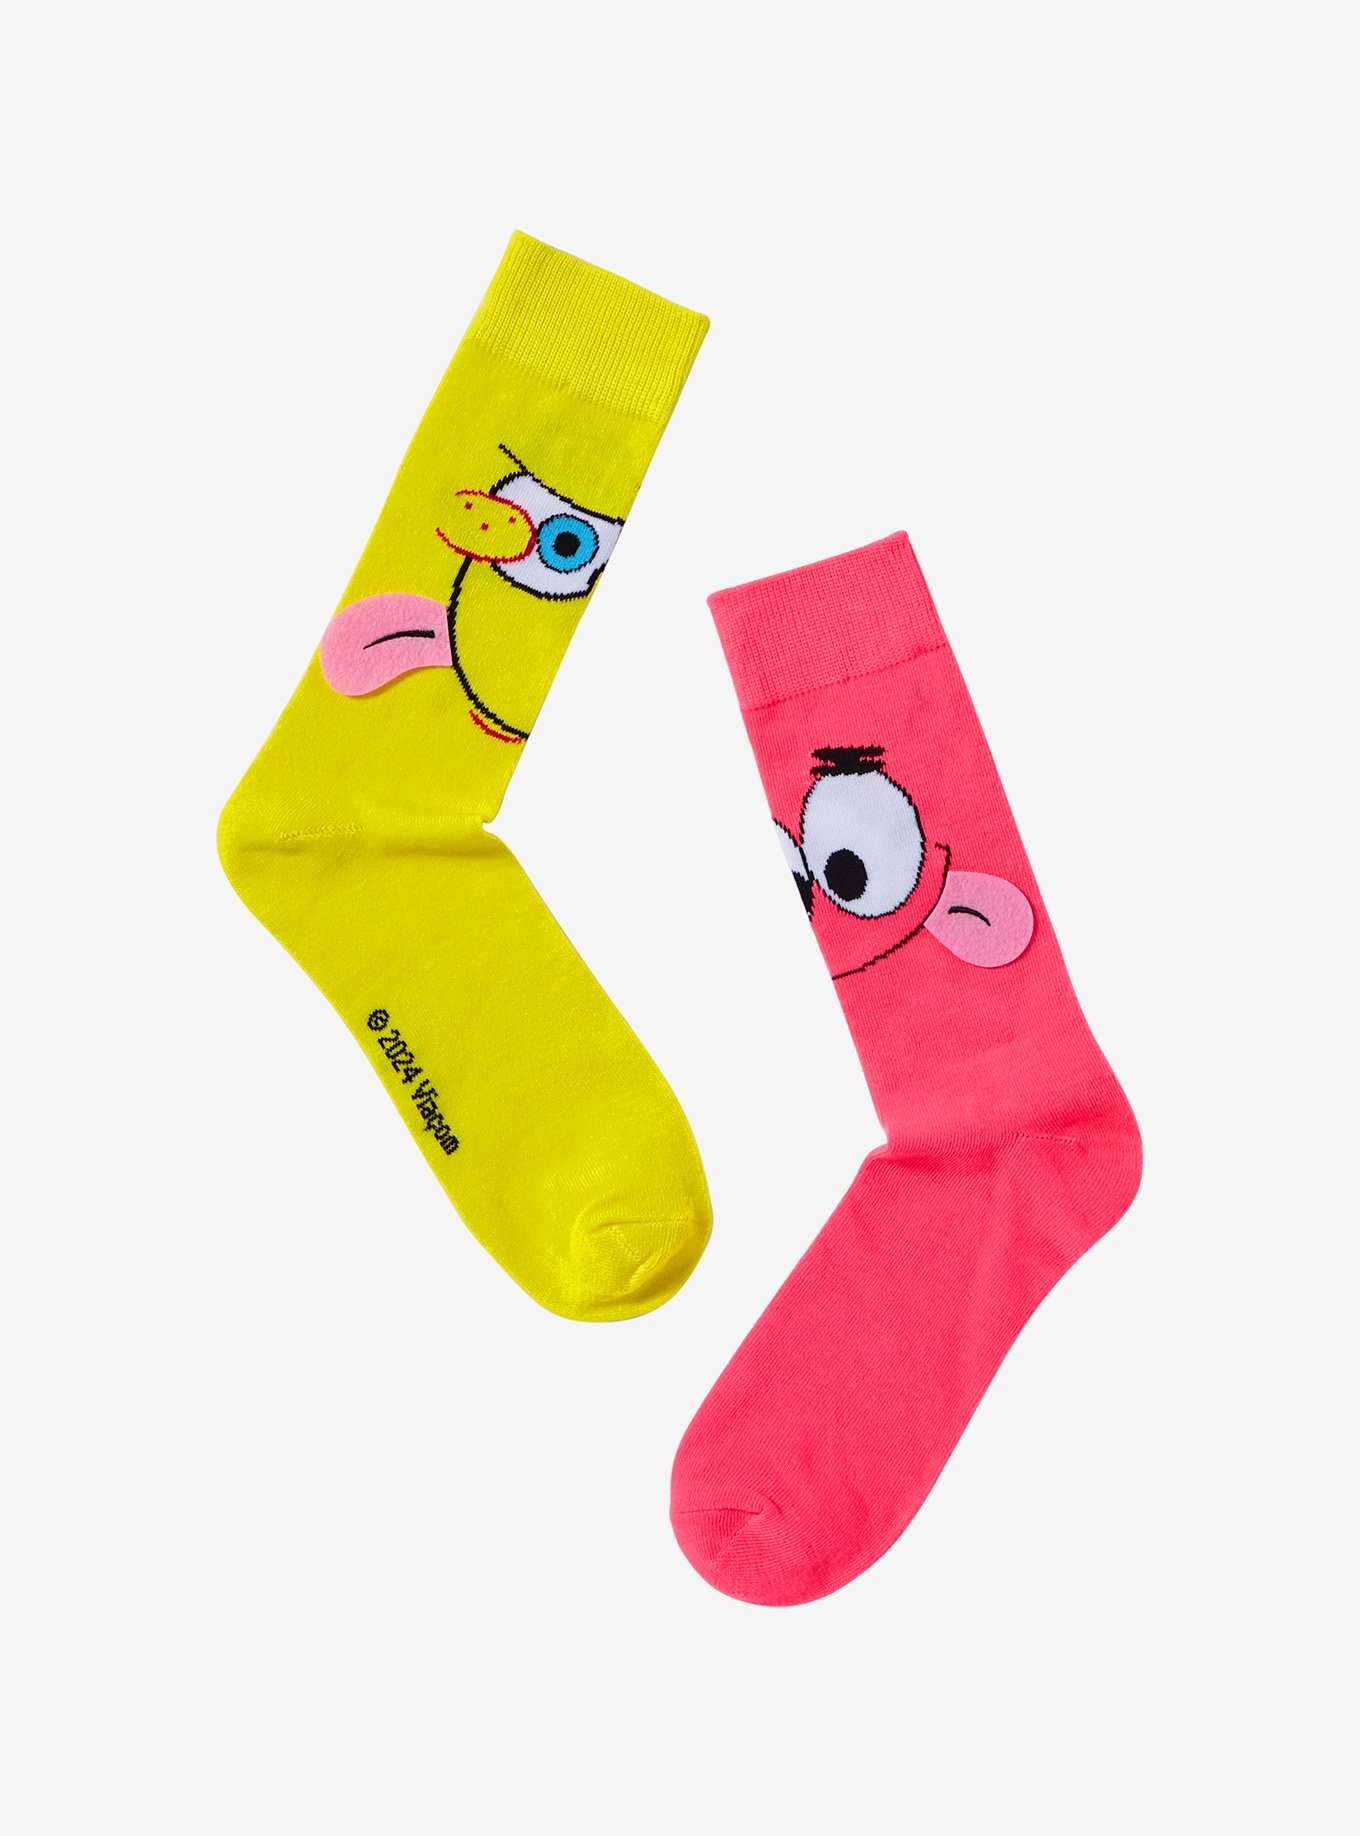 Crazy Socks, Womens, Food, Cup Noodles, Crew Socks, Novelty Silly Fun Cute  